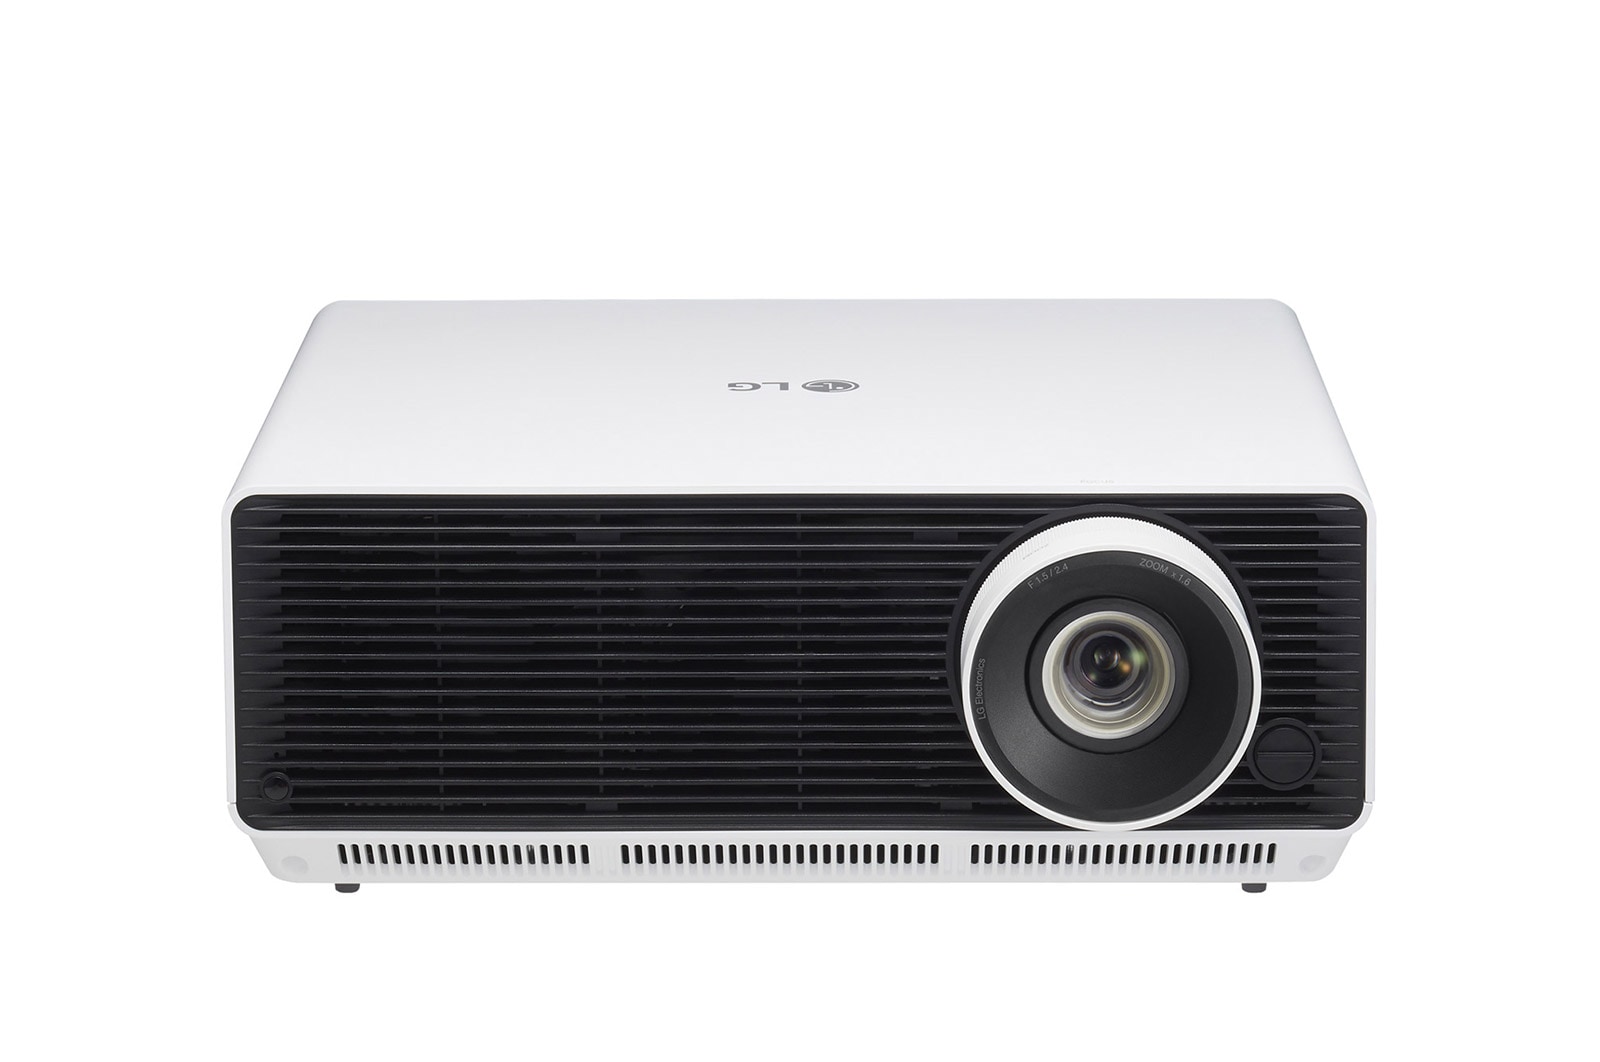 LG ProBeam WUXGA (1,920x1,200) Laser Projector with 5,000 ANSI Lumens Brightness, HDR10, 20,000 hrs. life, webOS 4.5, Wireless & Bluetooth Connection, BF50NST